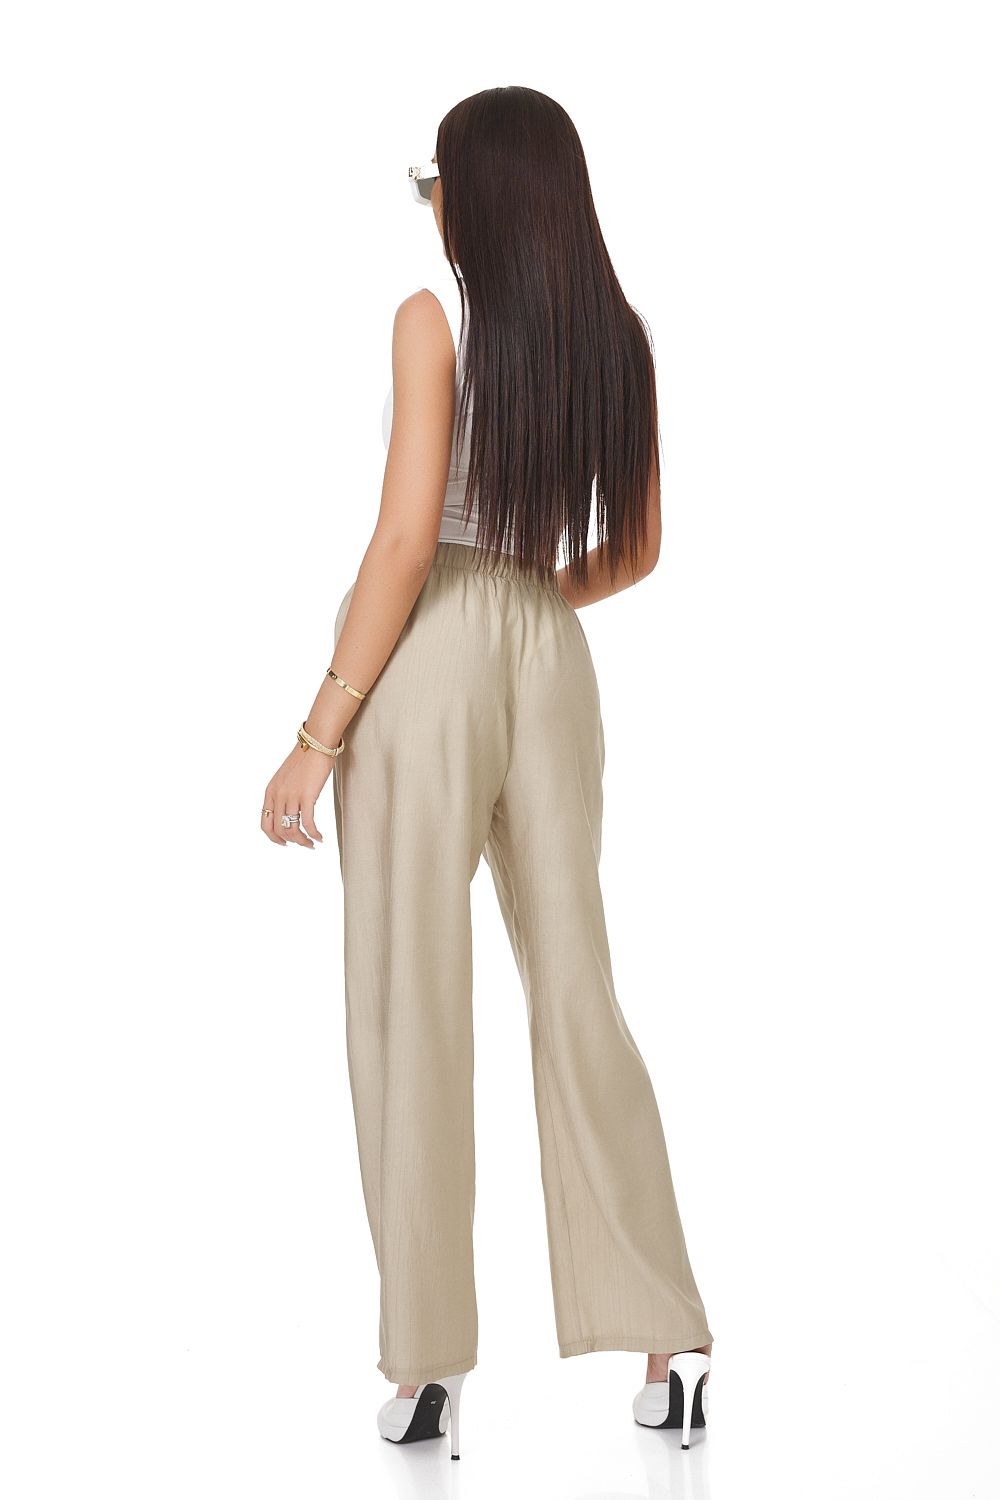 Chrissy Bogas casual beige trousers